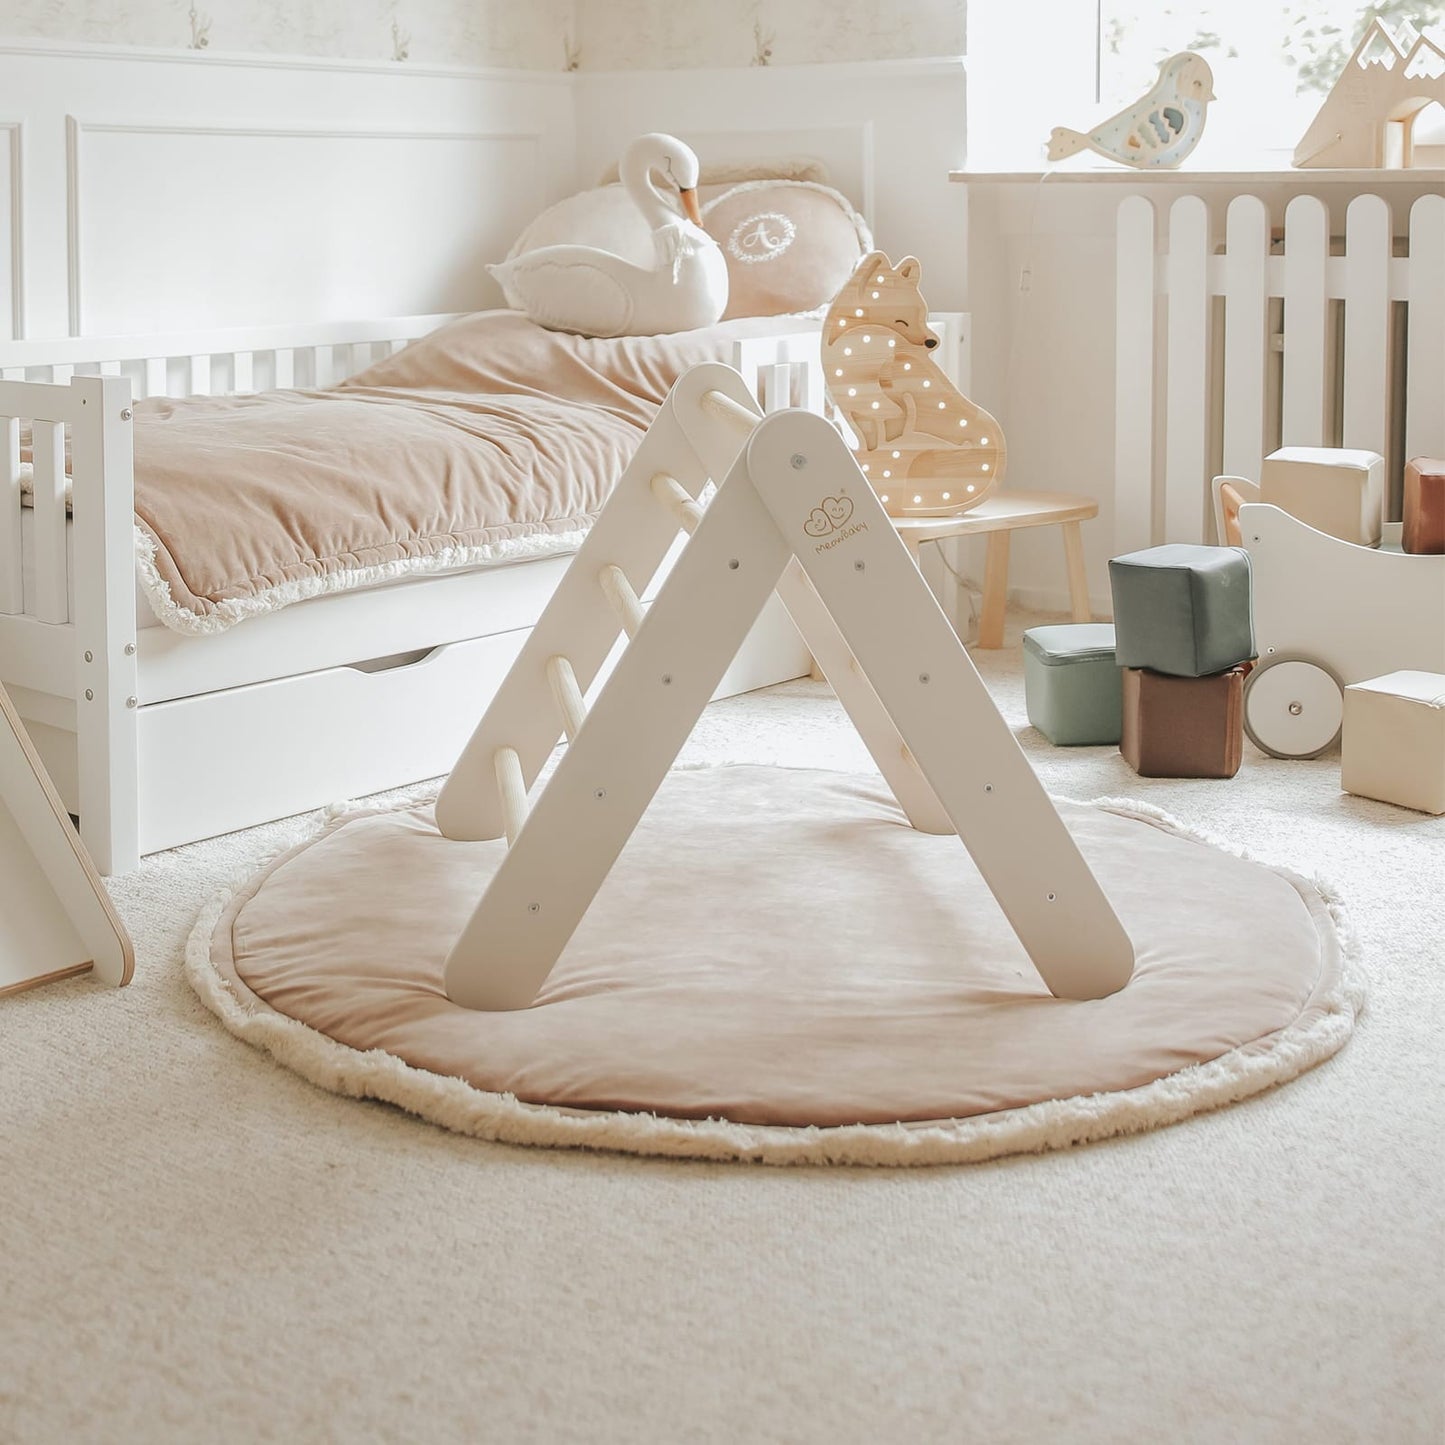 Folding Play House With Ladder For Kids By MeowBaby - Stylemykid.com